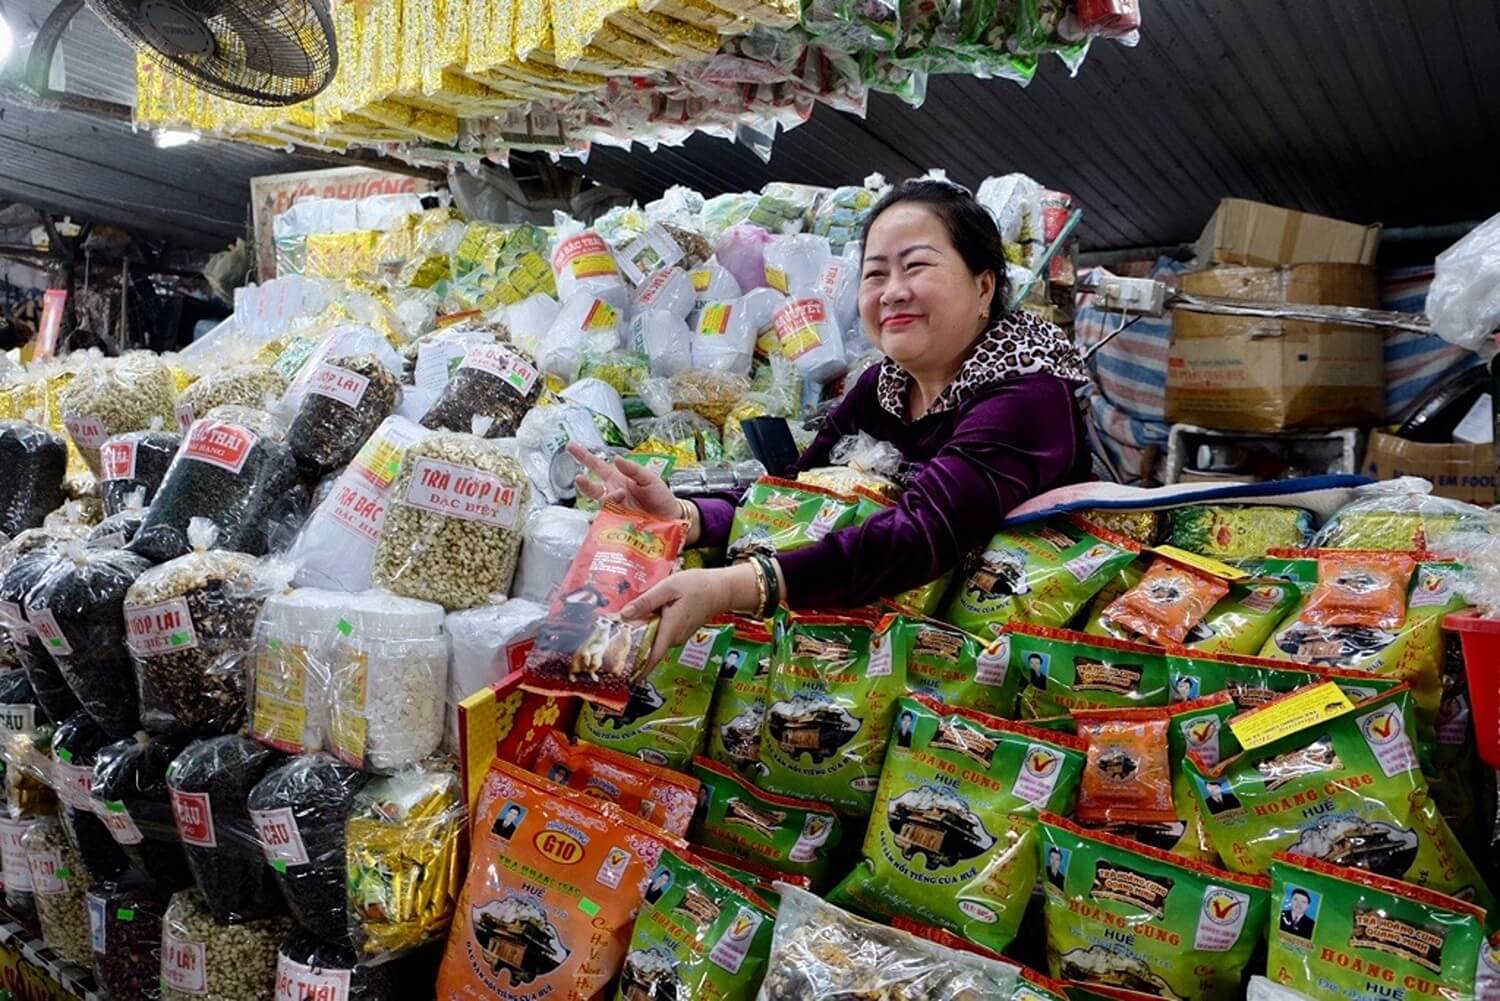 Asian individual smiles while holding bag in front of many other items at a market stand